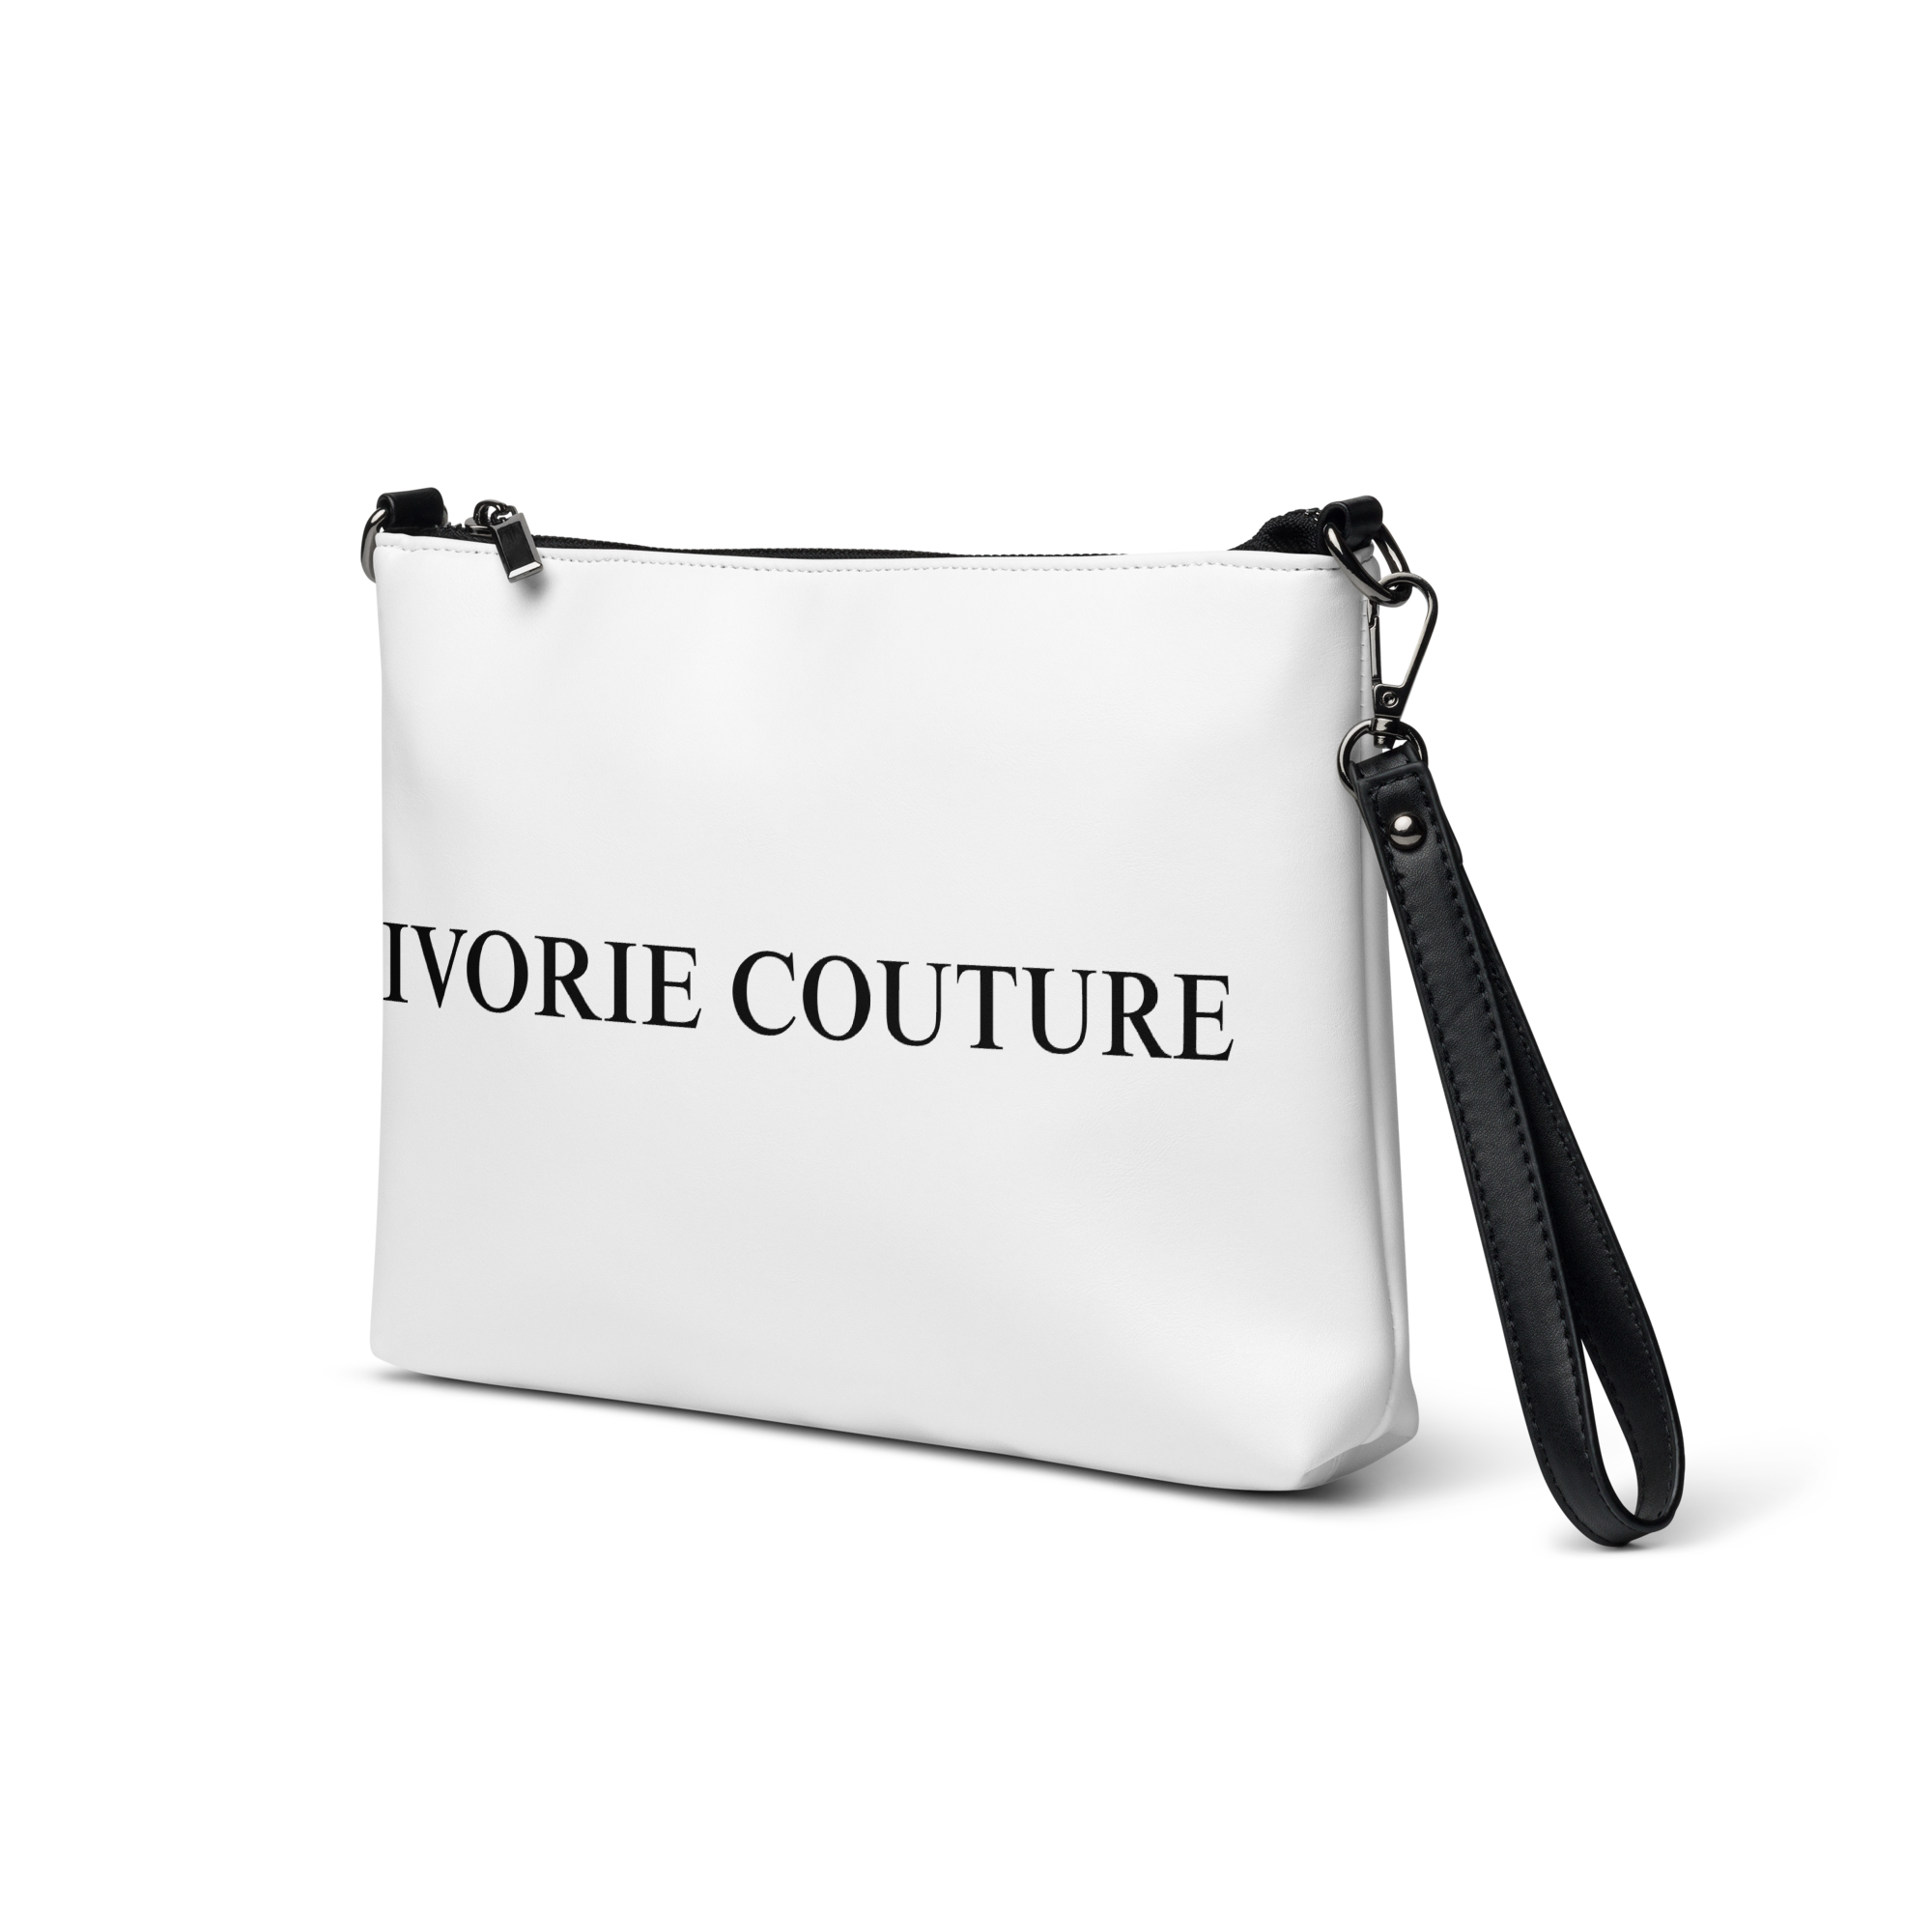 Ivorie Couture Blanca Crossbody bag purse White left side view